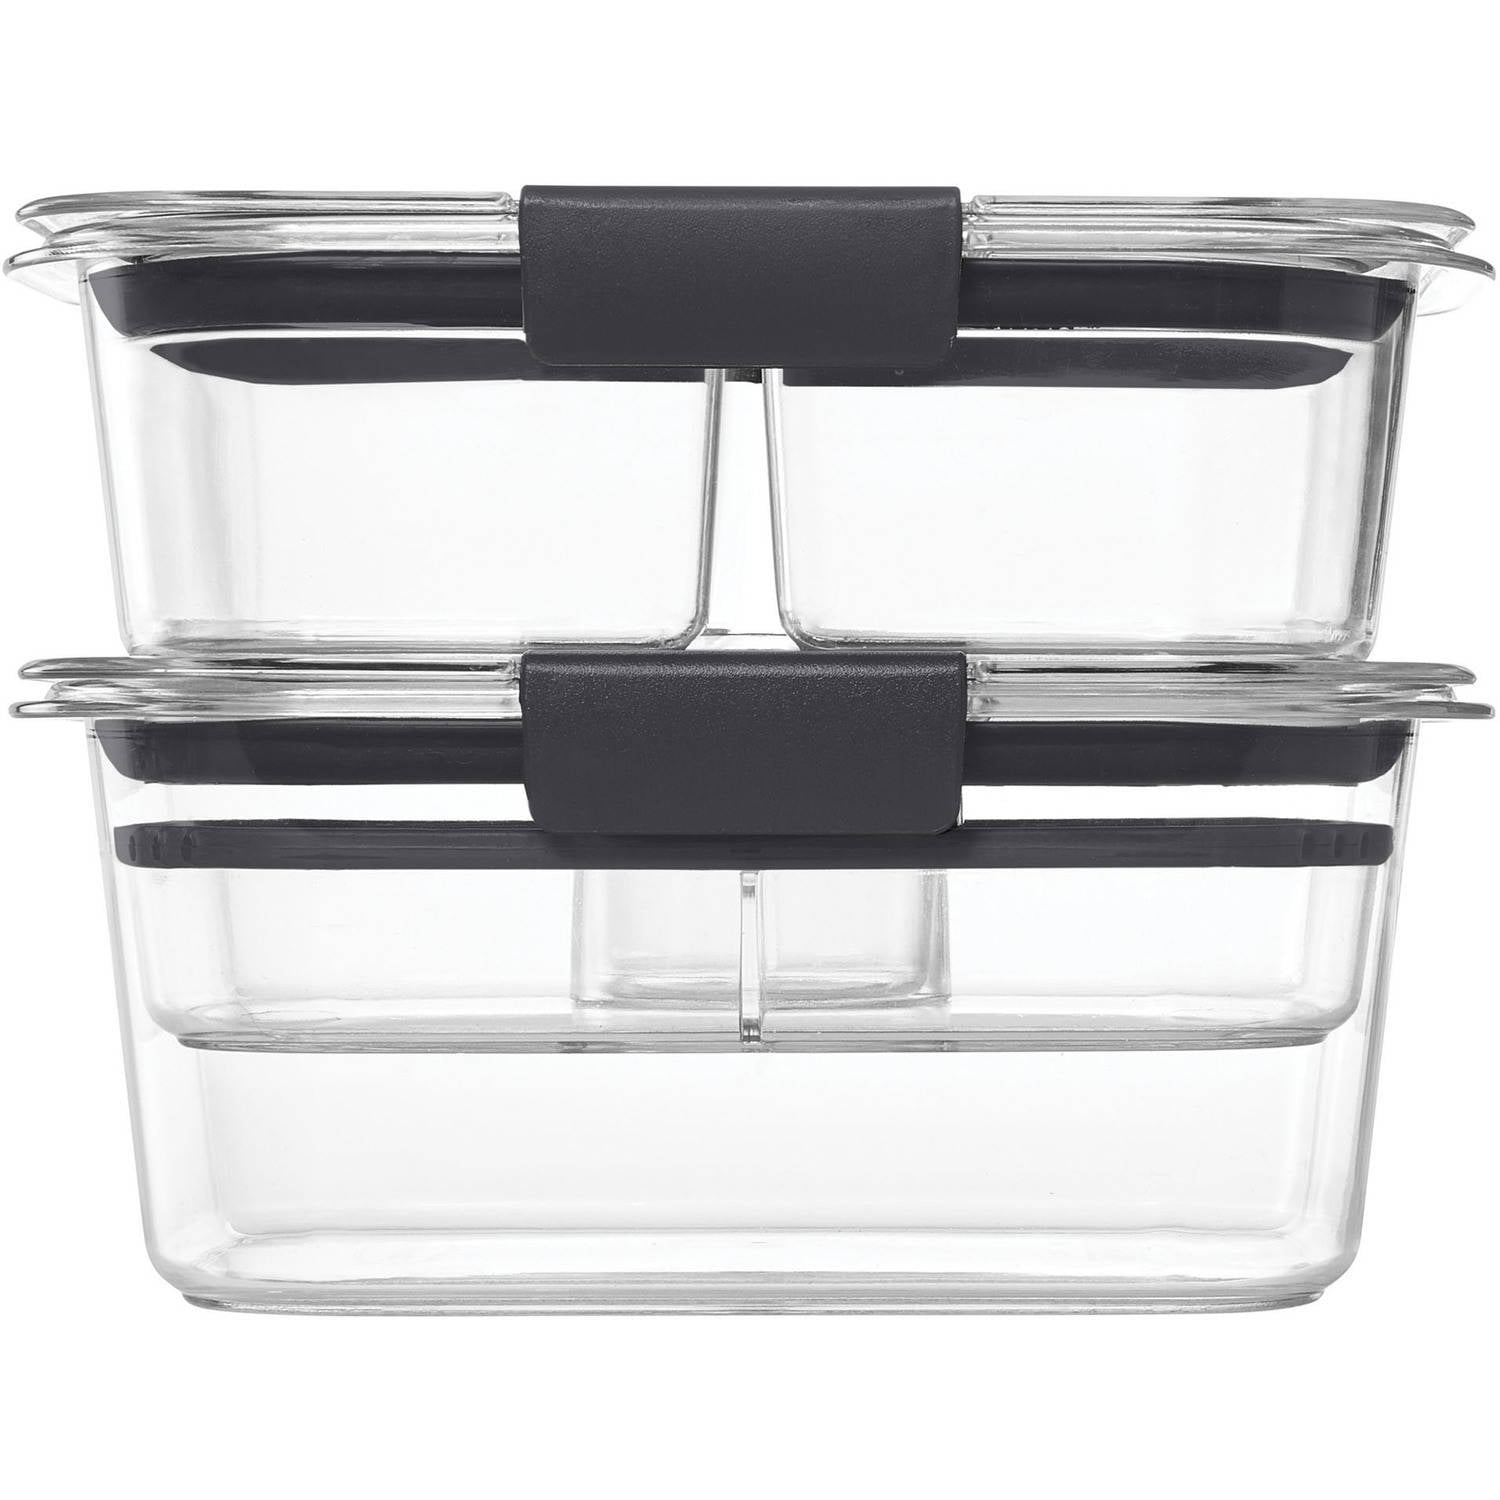 Rubbermaid 10-Piece Brilliance Food Storage Containers with Lids for Lunch,  Meal Prep, and Leftovers, Dishwasher Safe, 1.3-Cup, Clear/Grey 